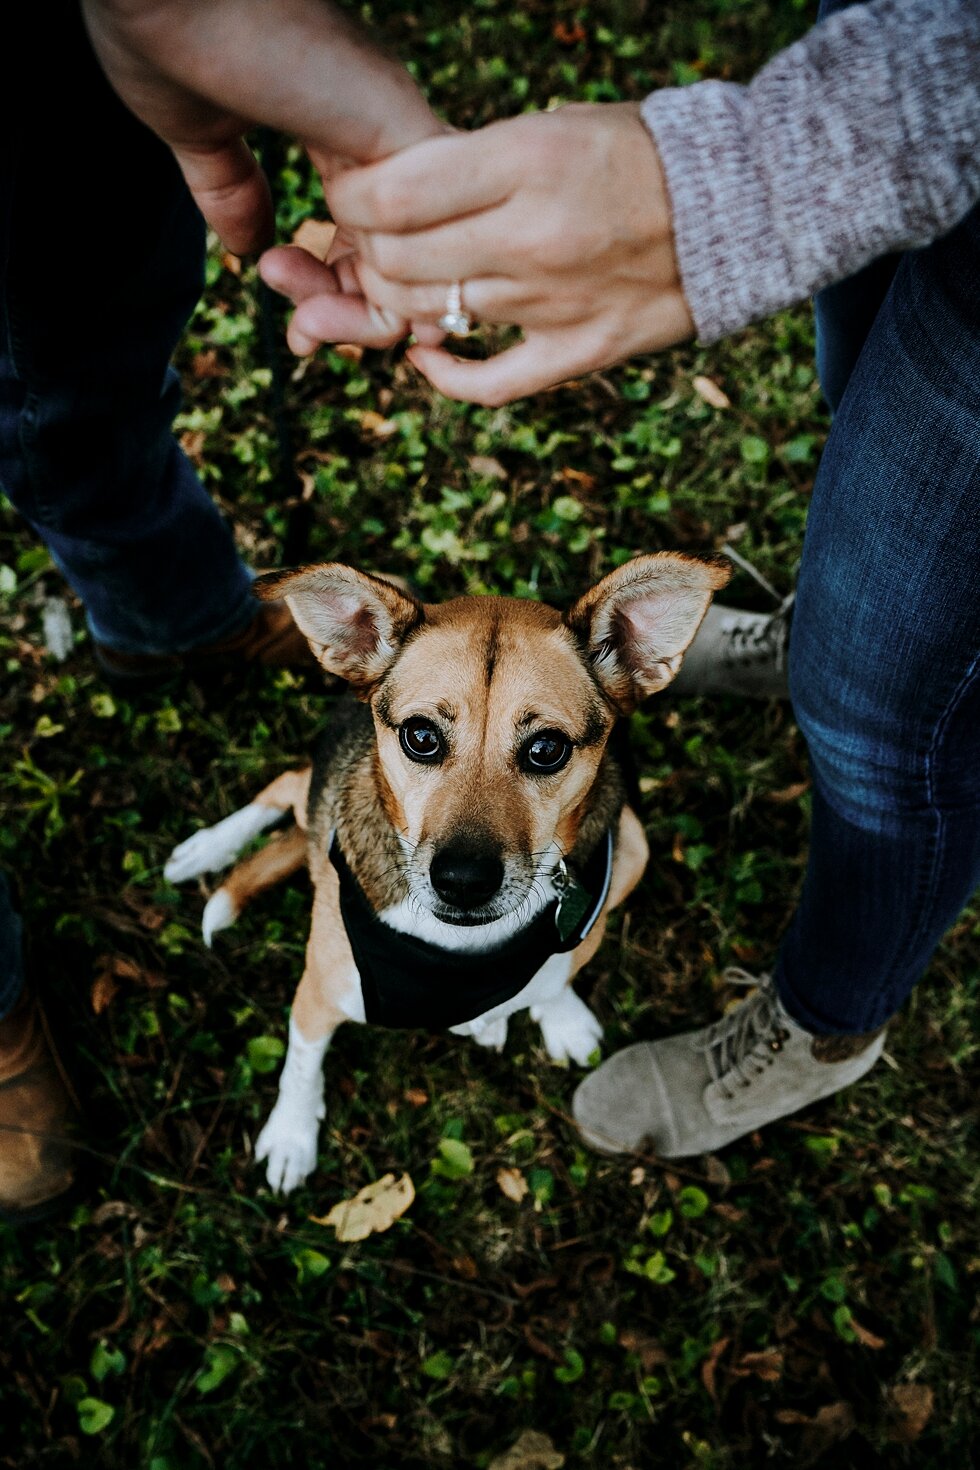  Engagement ring photo with their loyal pup perfectly posing for the camera #engagementgoals #engagementphotographer #engaged #outdoorengagement #kentuckyphotographer #indianaphotographer #louisvillephotographer #engagementphotos #savethedatephotos #